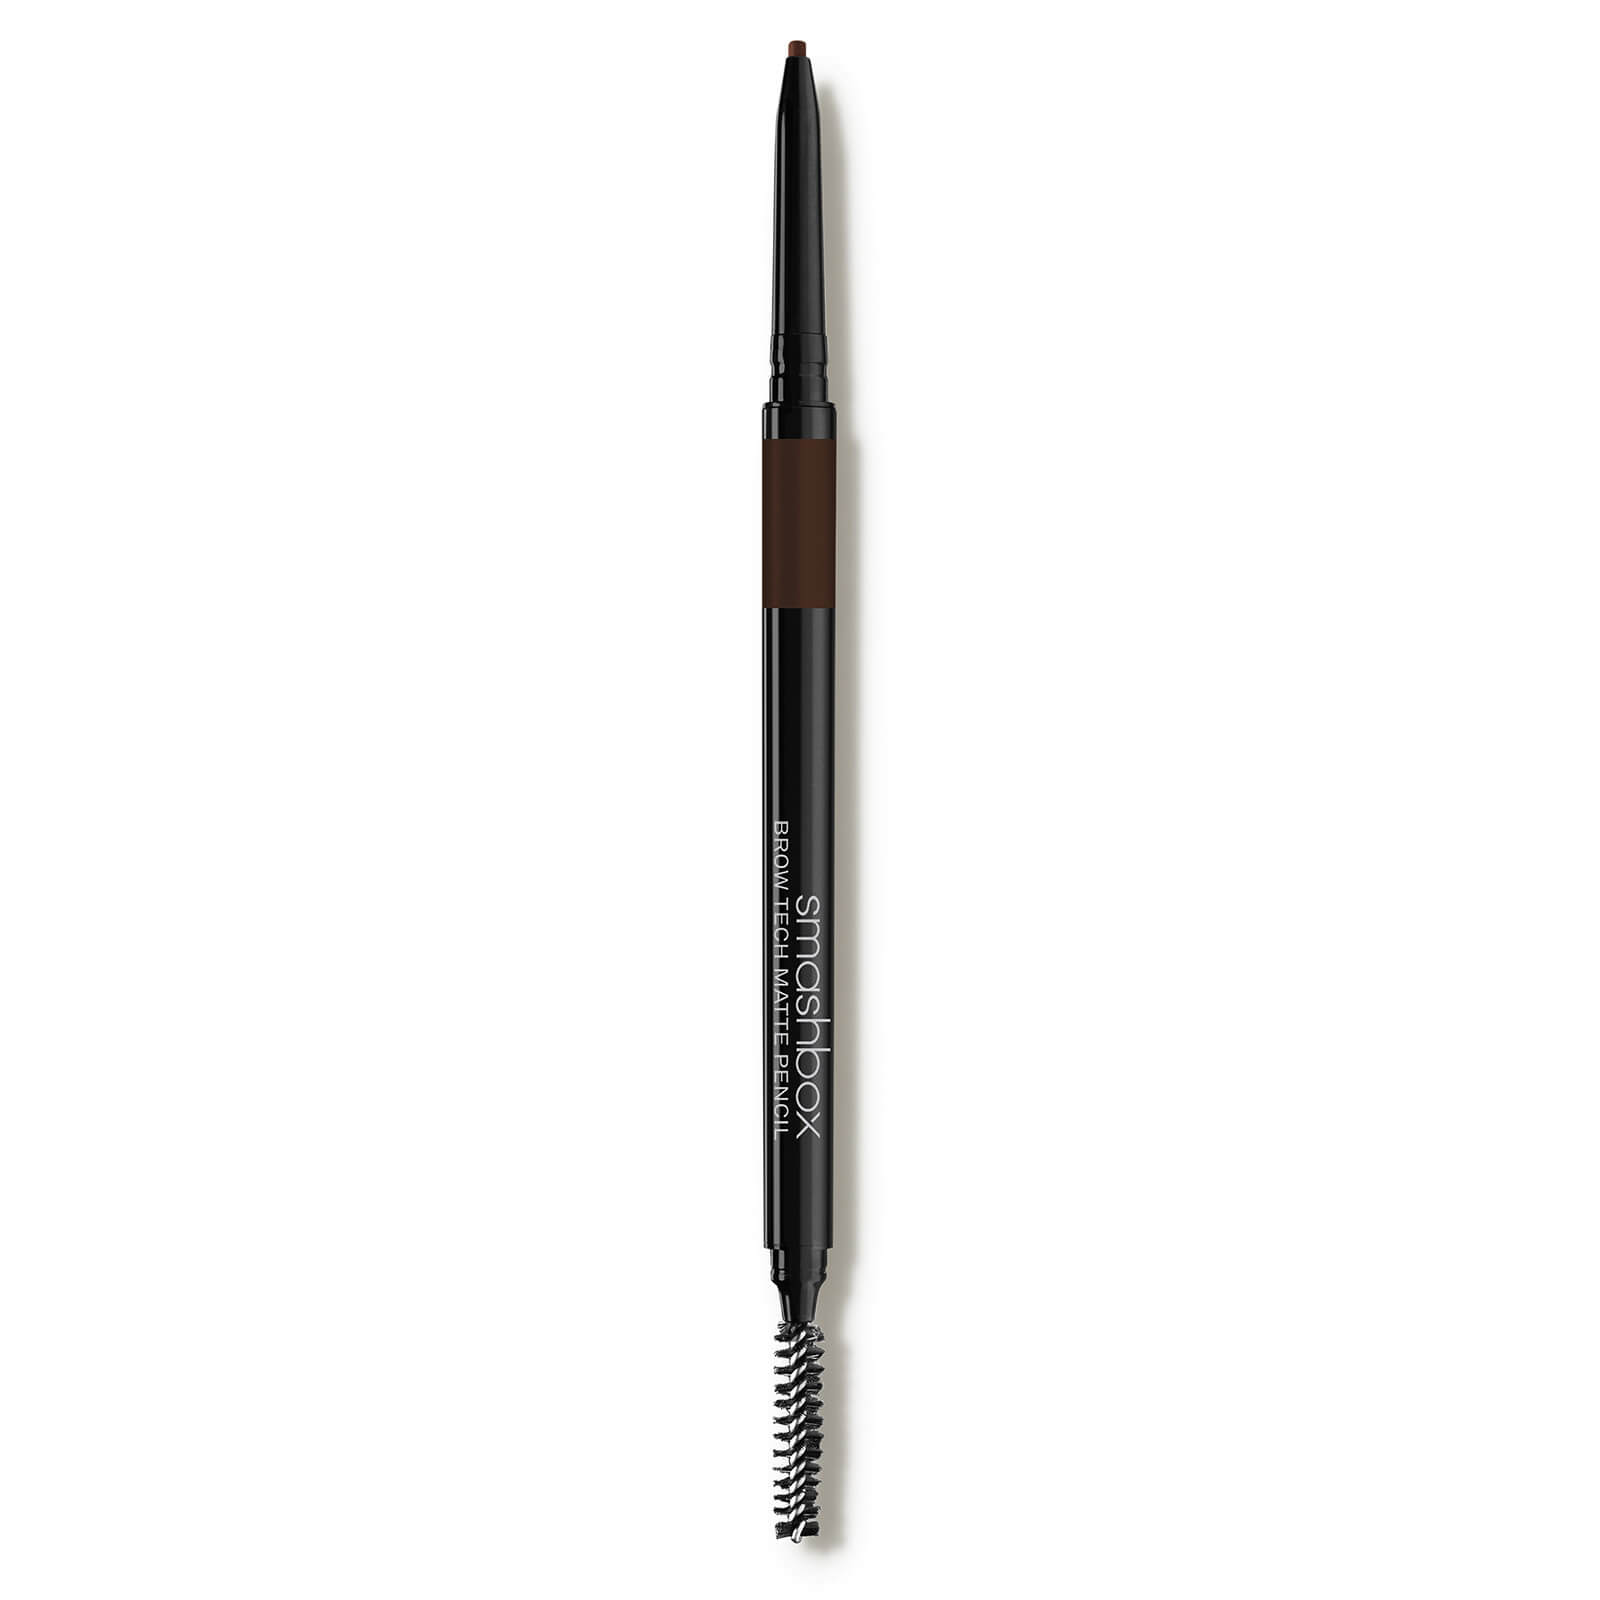 Smashbox Brow Tech to Go (Various Shades) - Brunette